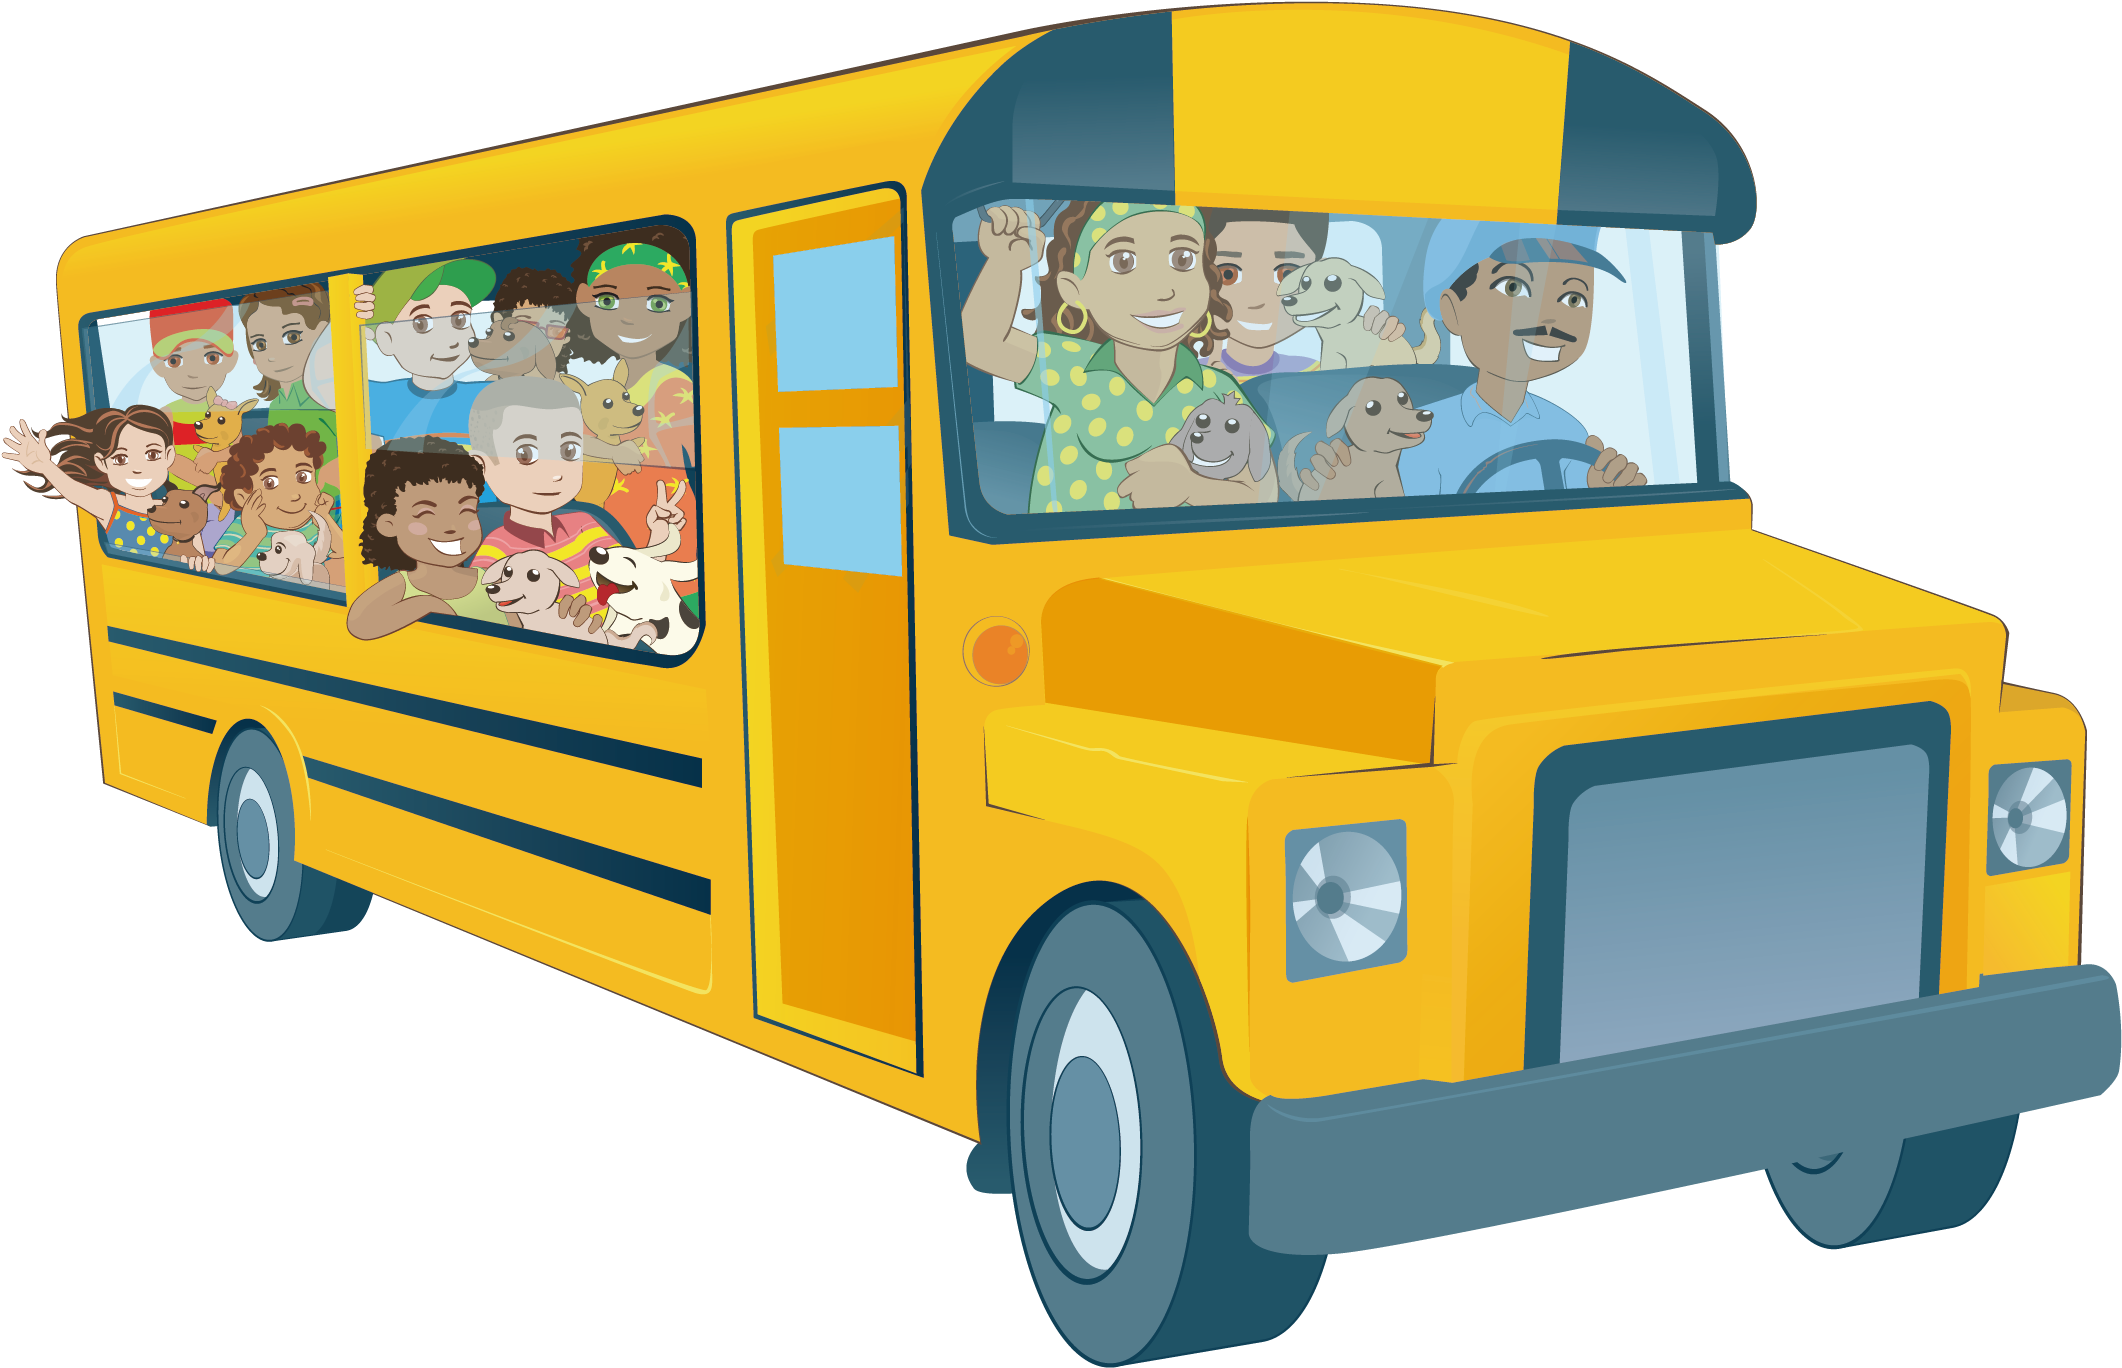 Bus Illustration PNG HD Quality